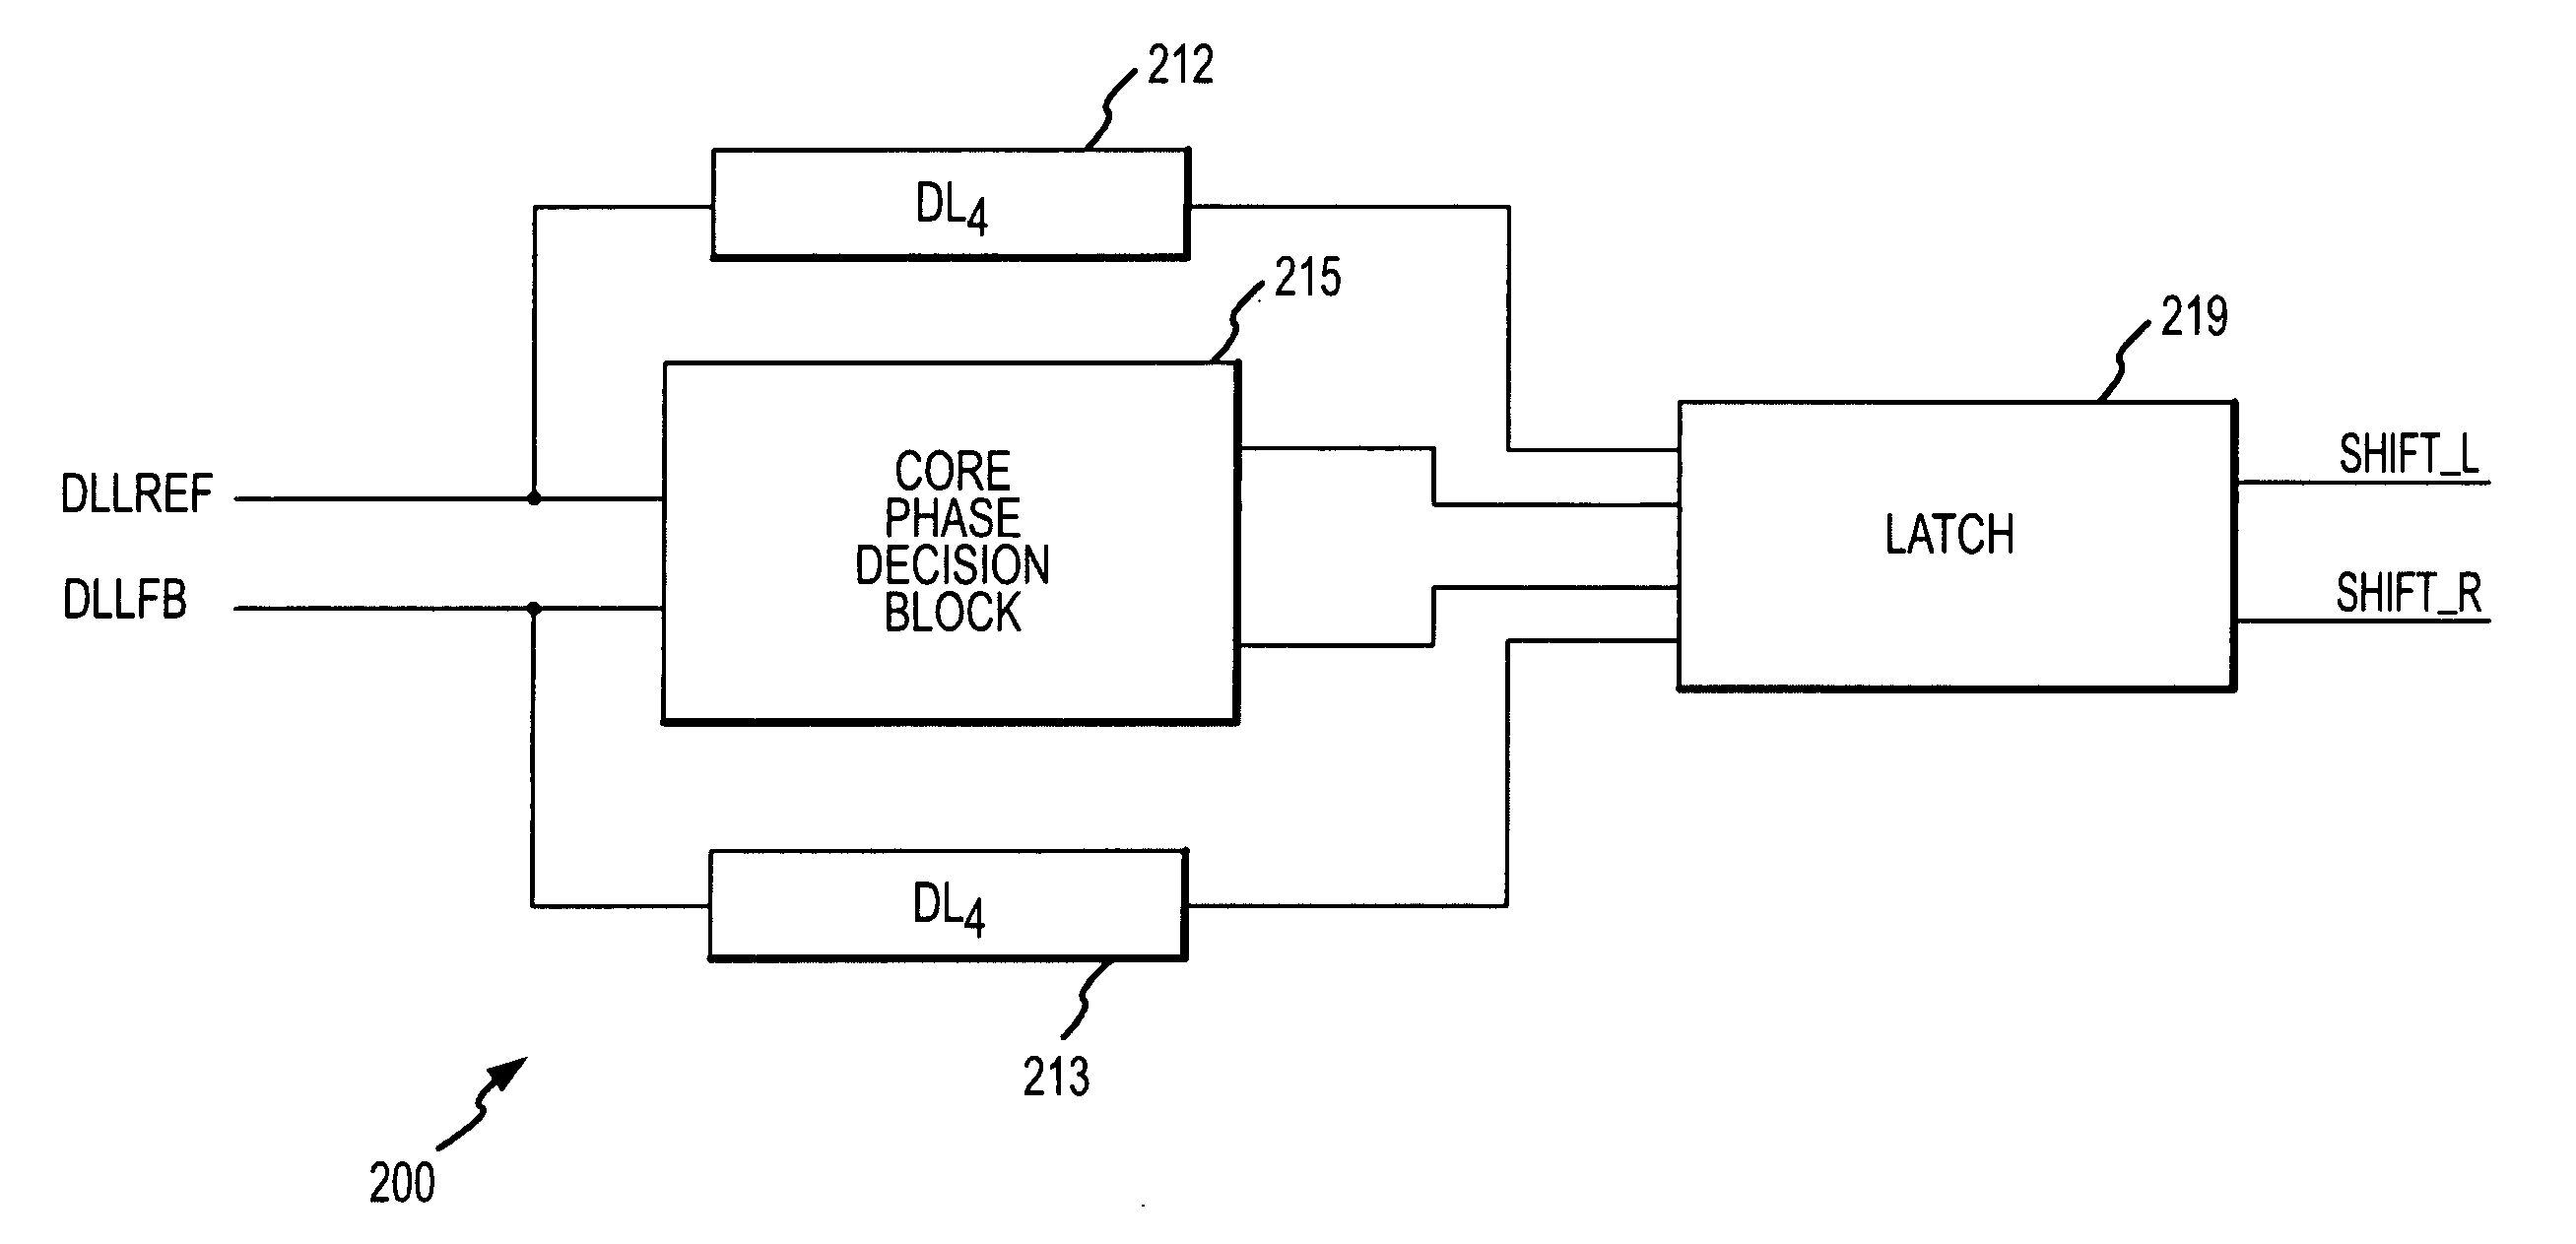 Fast response time, low power phase detector circuits, devices and systems incorporating the same, and associated methods